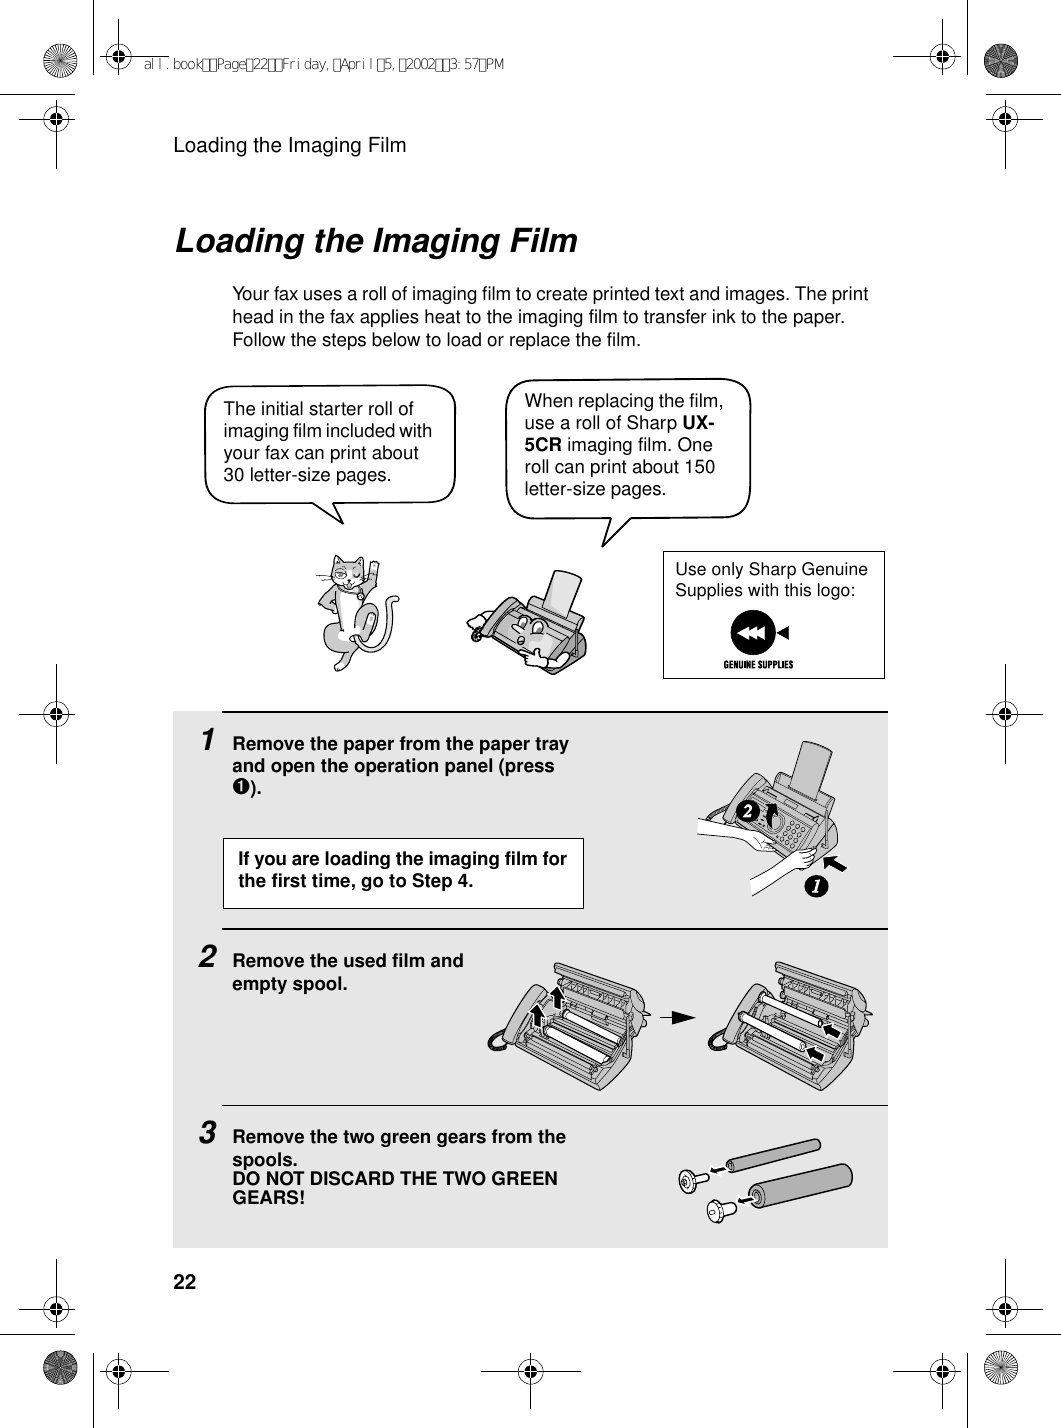 Loading the Imaging Film22Loading the Imaging FilmYour fax uses a roll of imaging film to create printed text and images. The print head in the fax applies heat to the imaging film to transfer ink to the paper. Follow the steps below to load or replace the film.1Remove the paper from the paper tray and open the operation panel (press ➊).2Remove the used film andempty spool.3Remove the two green gears from the spools. DO NOT DISCARD THE TWO GREEN GEARS!12When replacing the film, use a roll of Sharp UX-5CR imaging film. One roll can print about 150 letter-size pages.The initial starter roll of imaging film included with your fax can print about 30 letter-size pages. If you are loading the imaging film for the first time, go to Step 4.Use only Sharp Genuine Supplies with this logo:all.bookPage22Friday,April5,20023:57PM